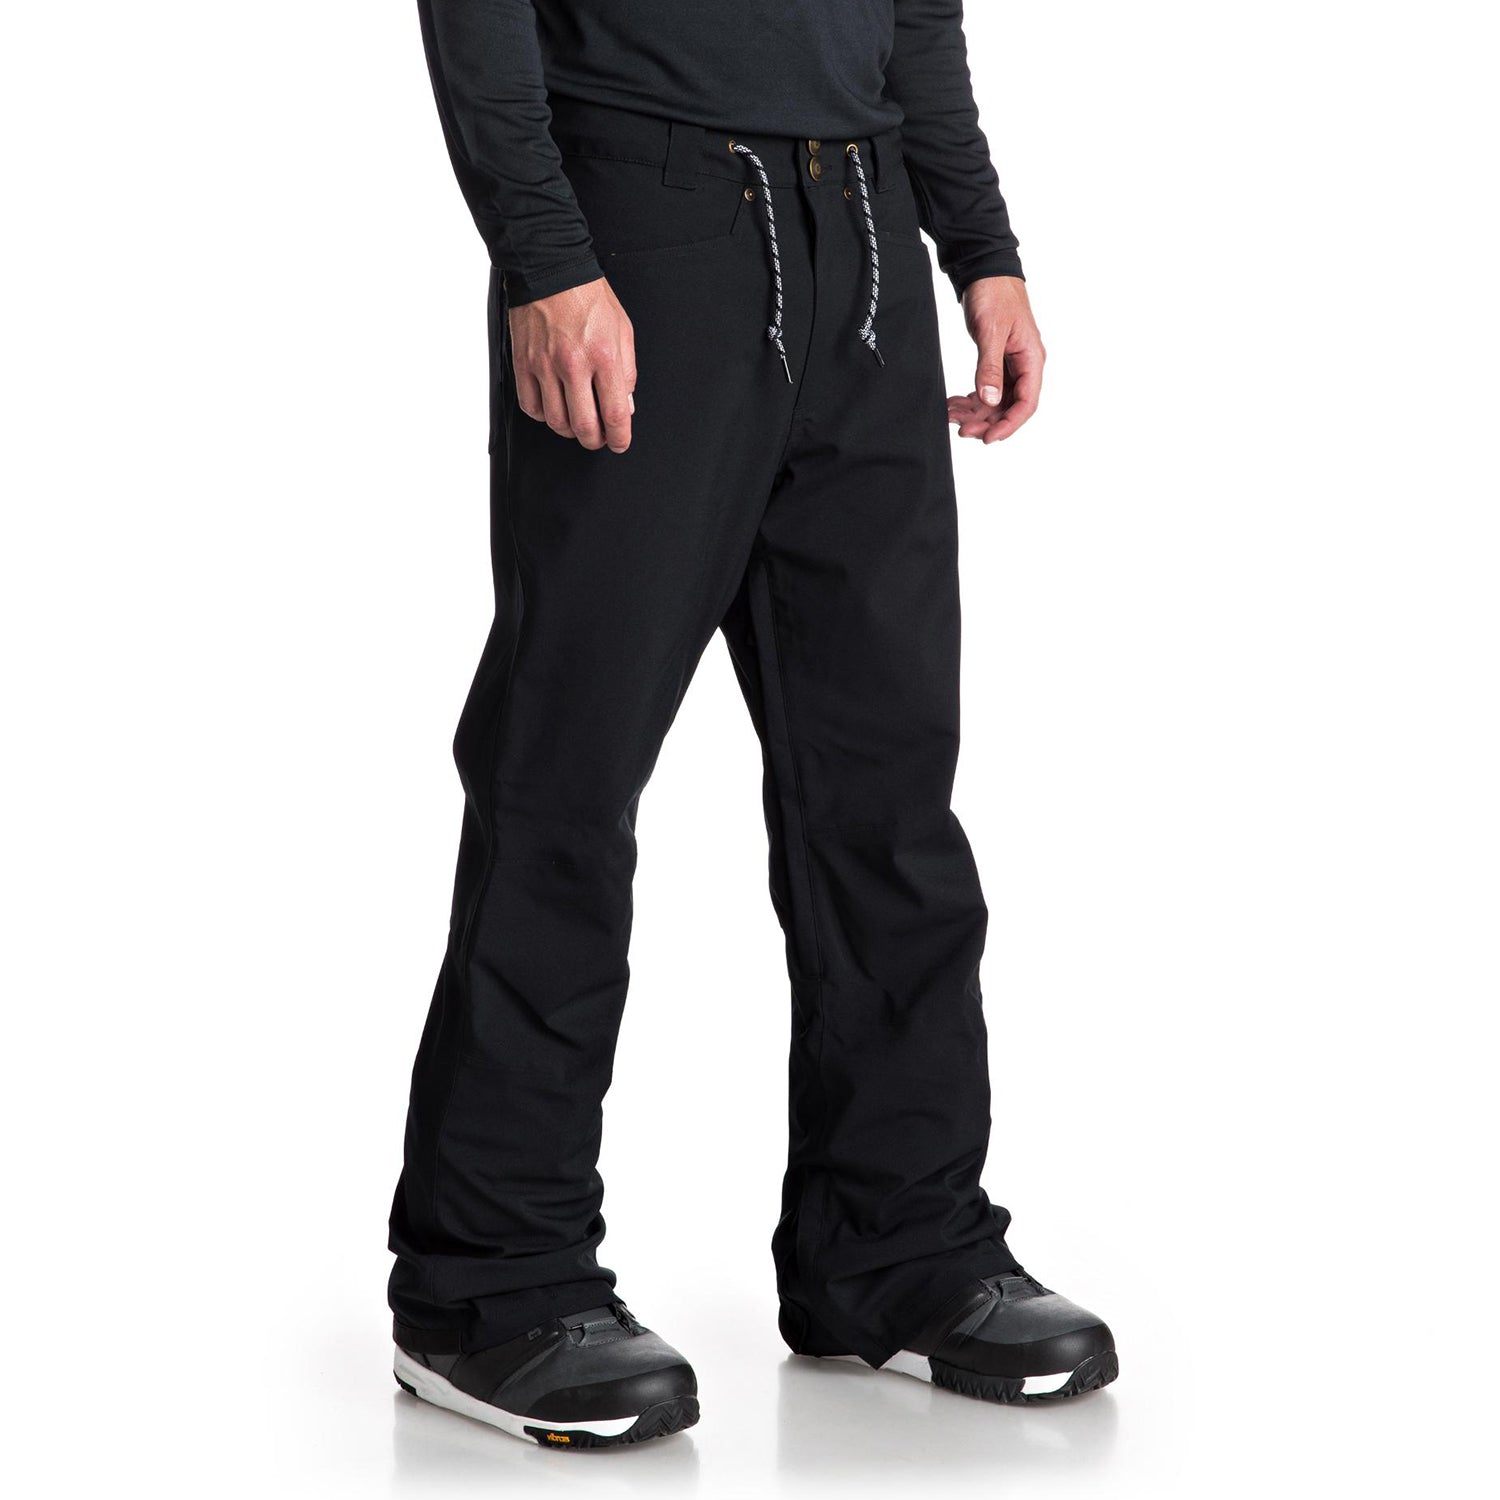 DC Relay Snowboard Pant 2019 - Buy Now 